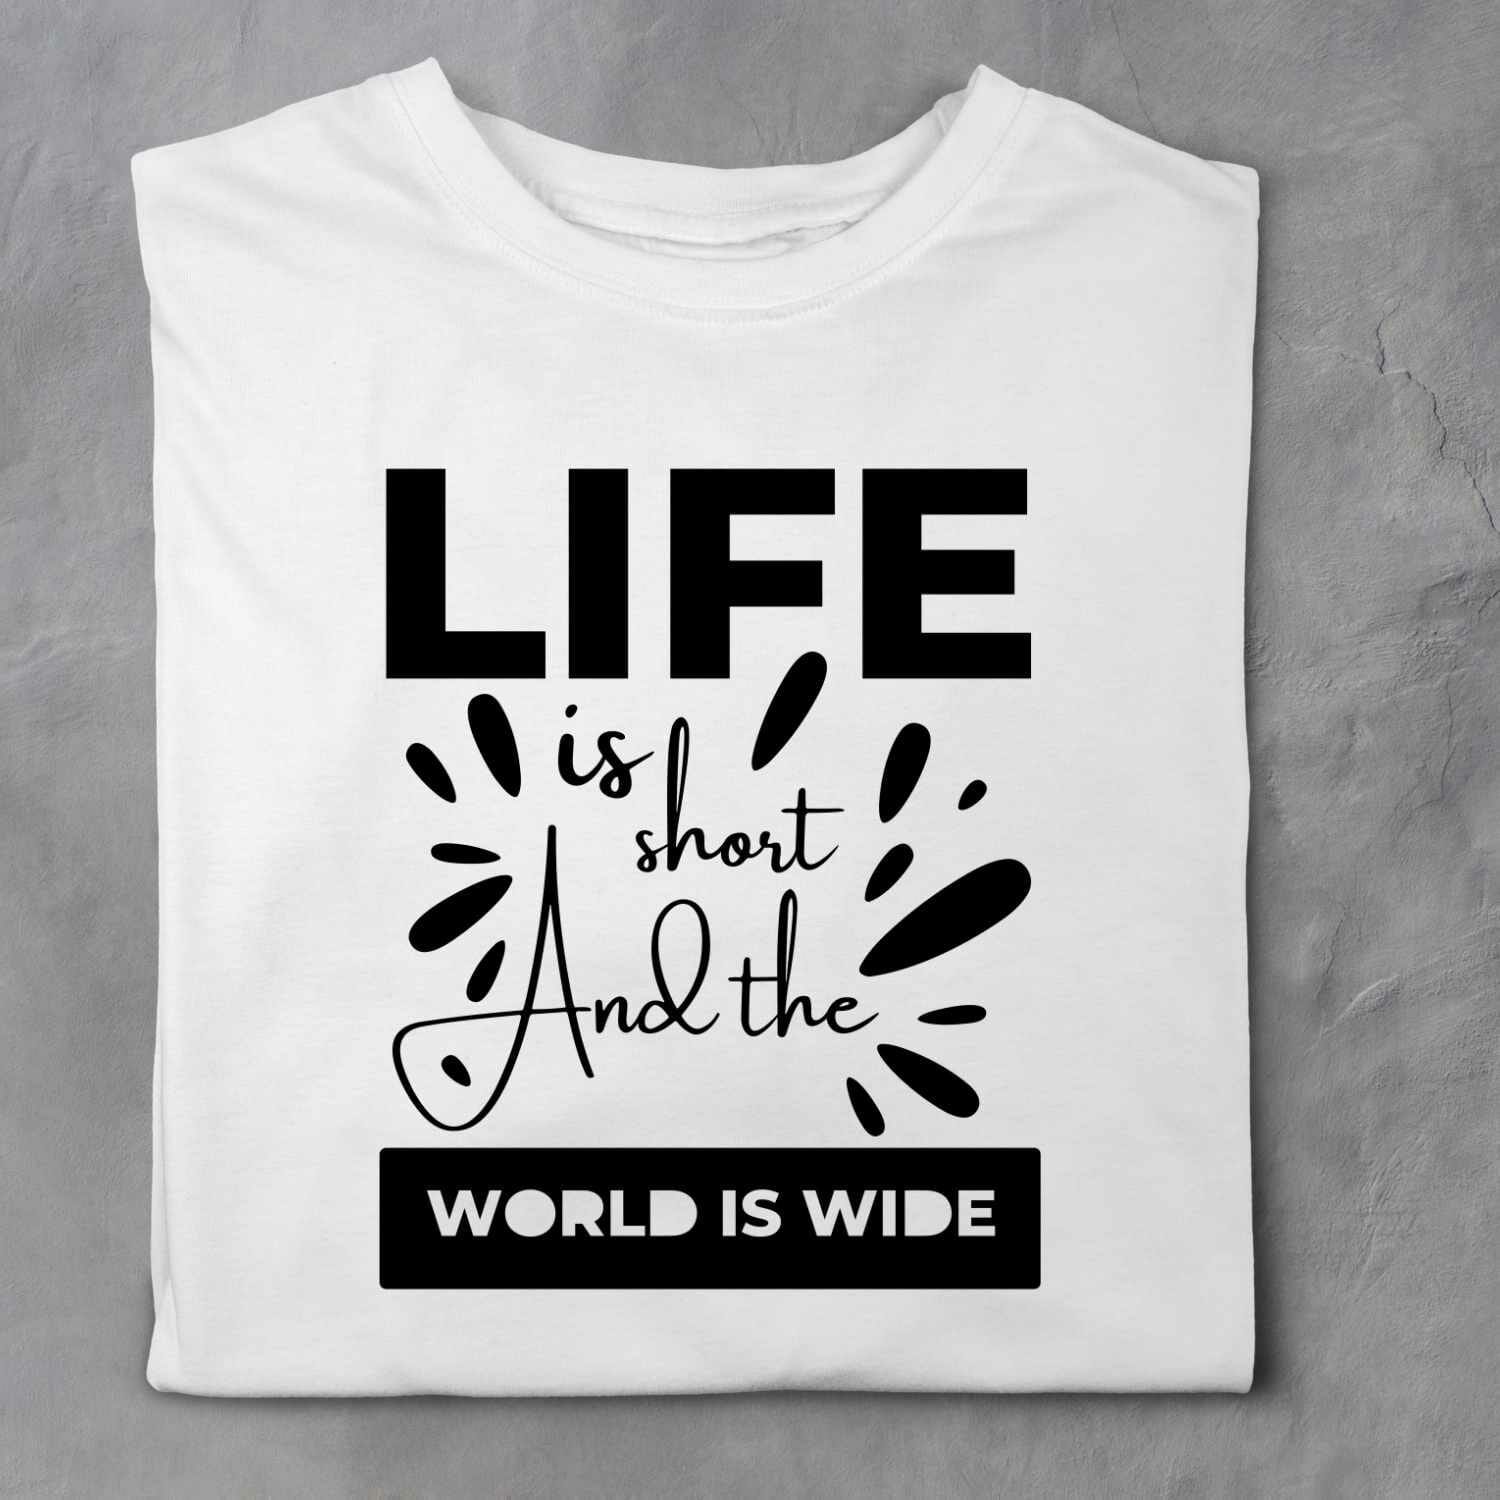 Life is short and the world is wide T-shirt design